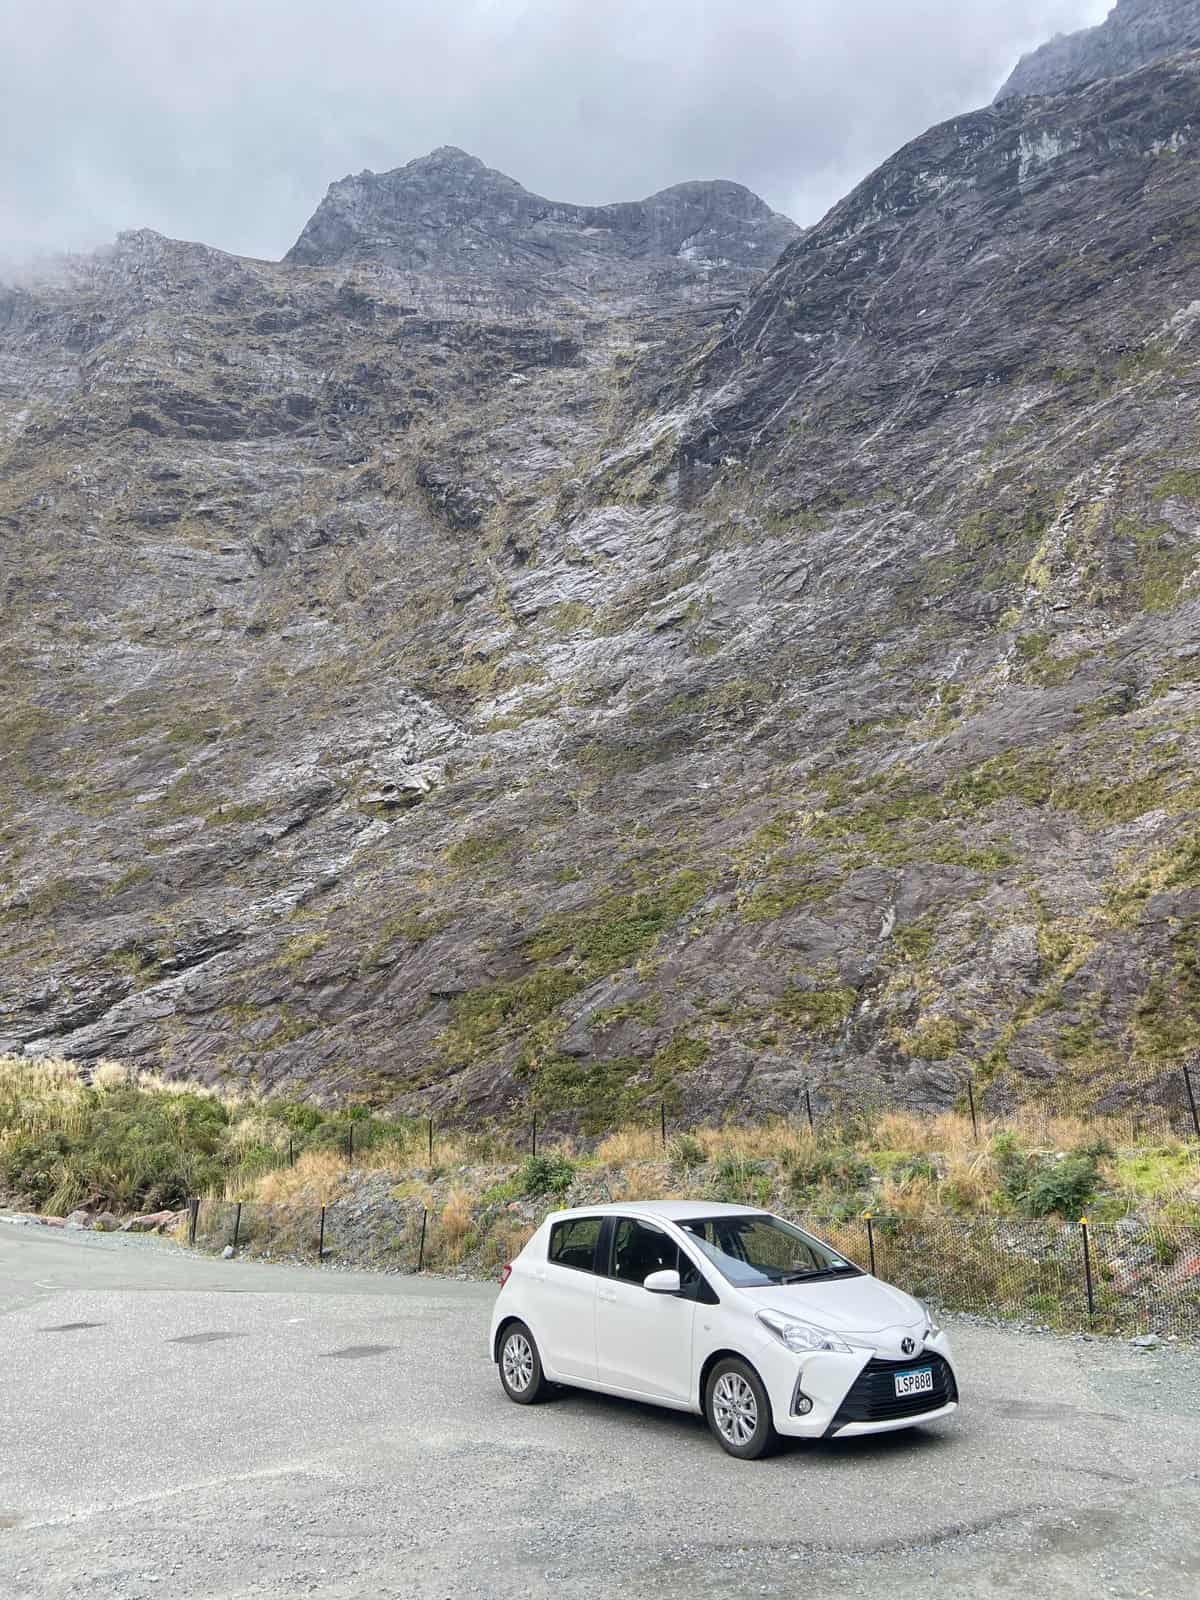 Our rental car on the road to Milford Sound in New Zealand